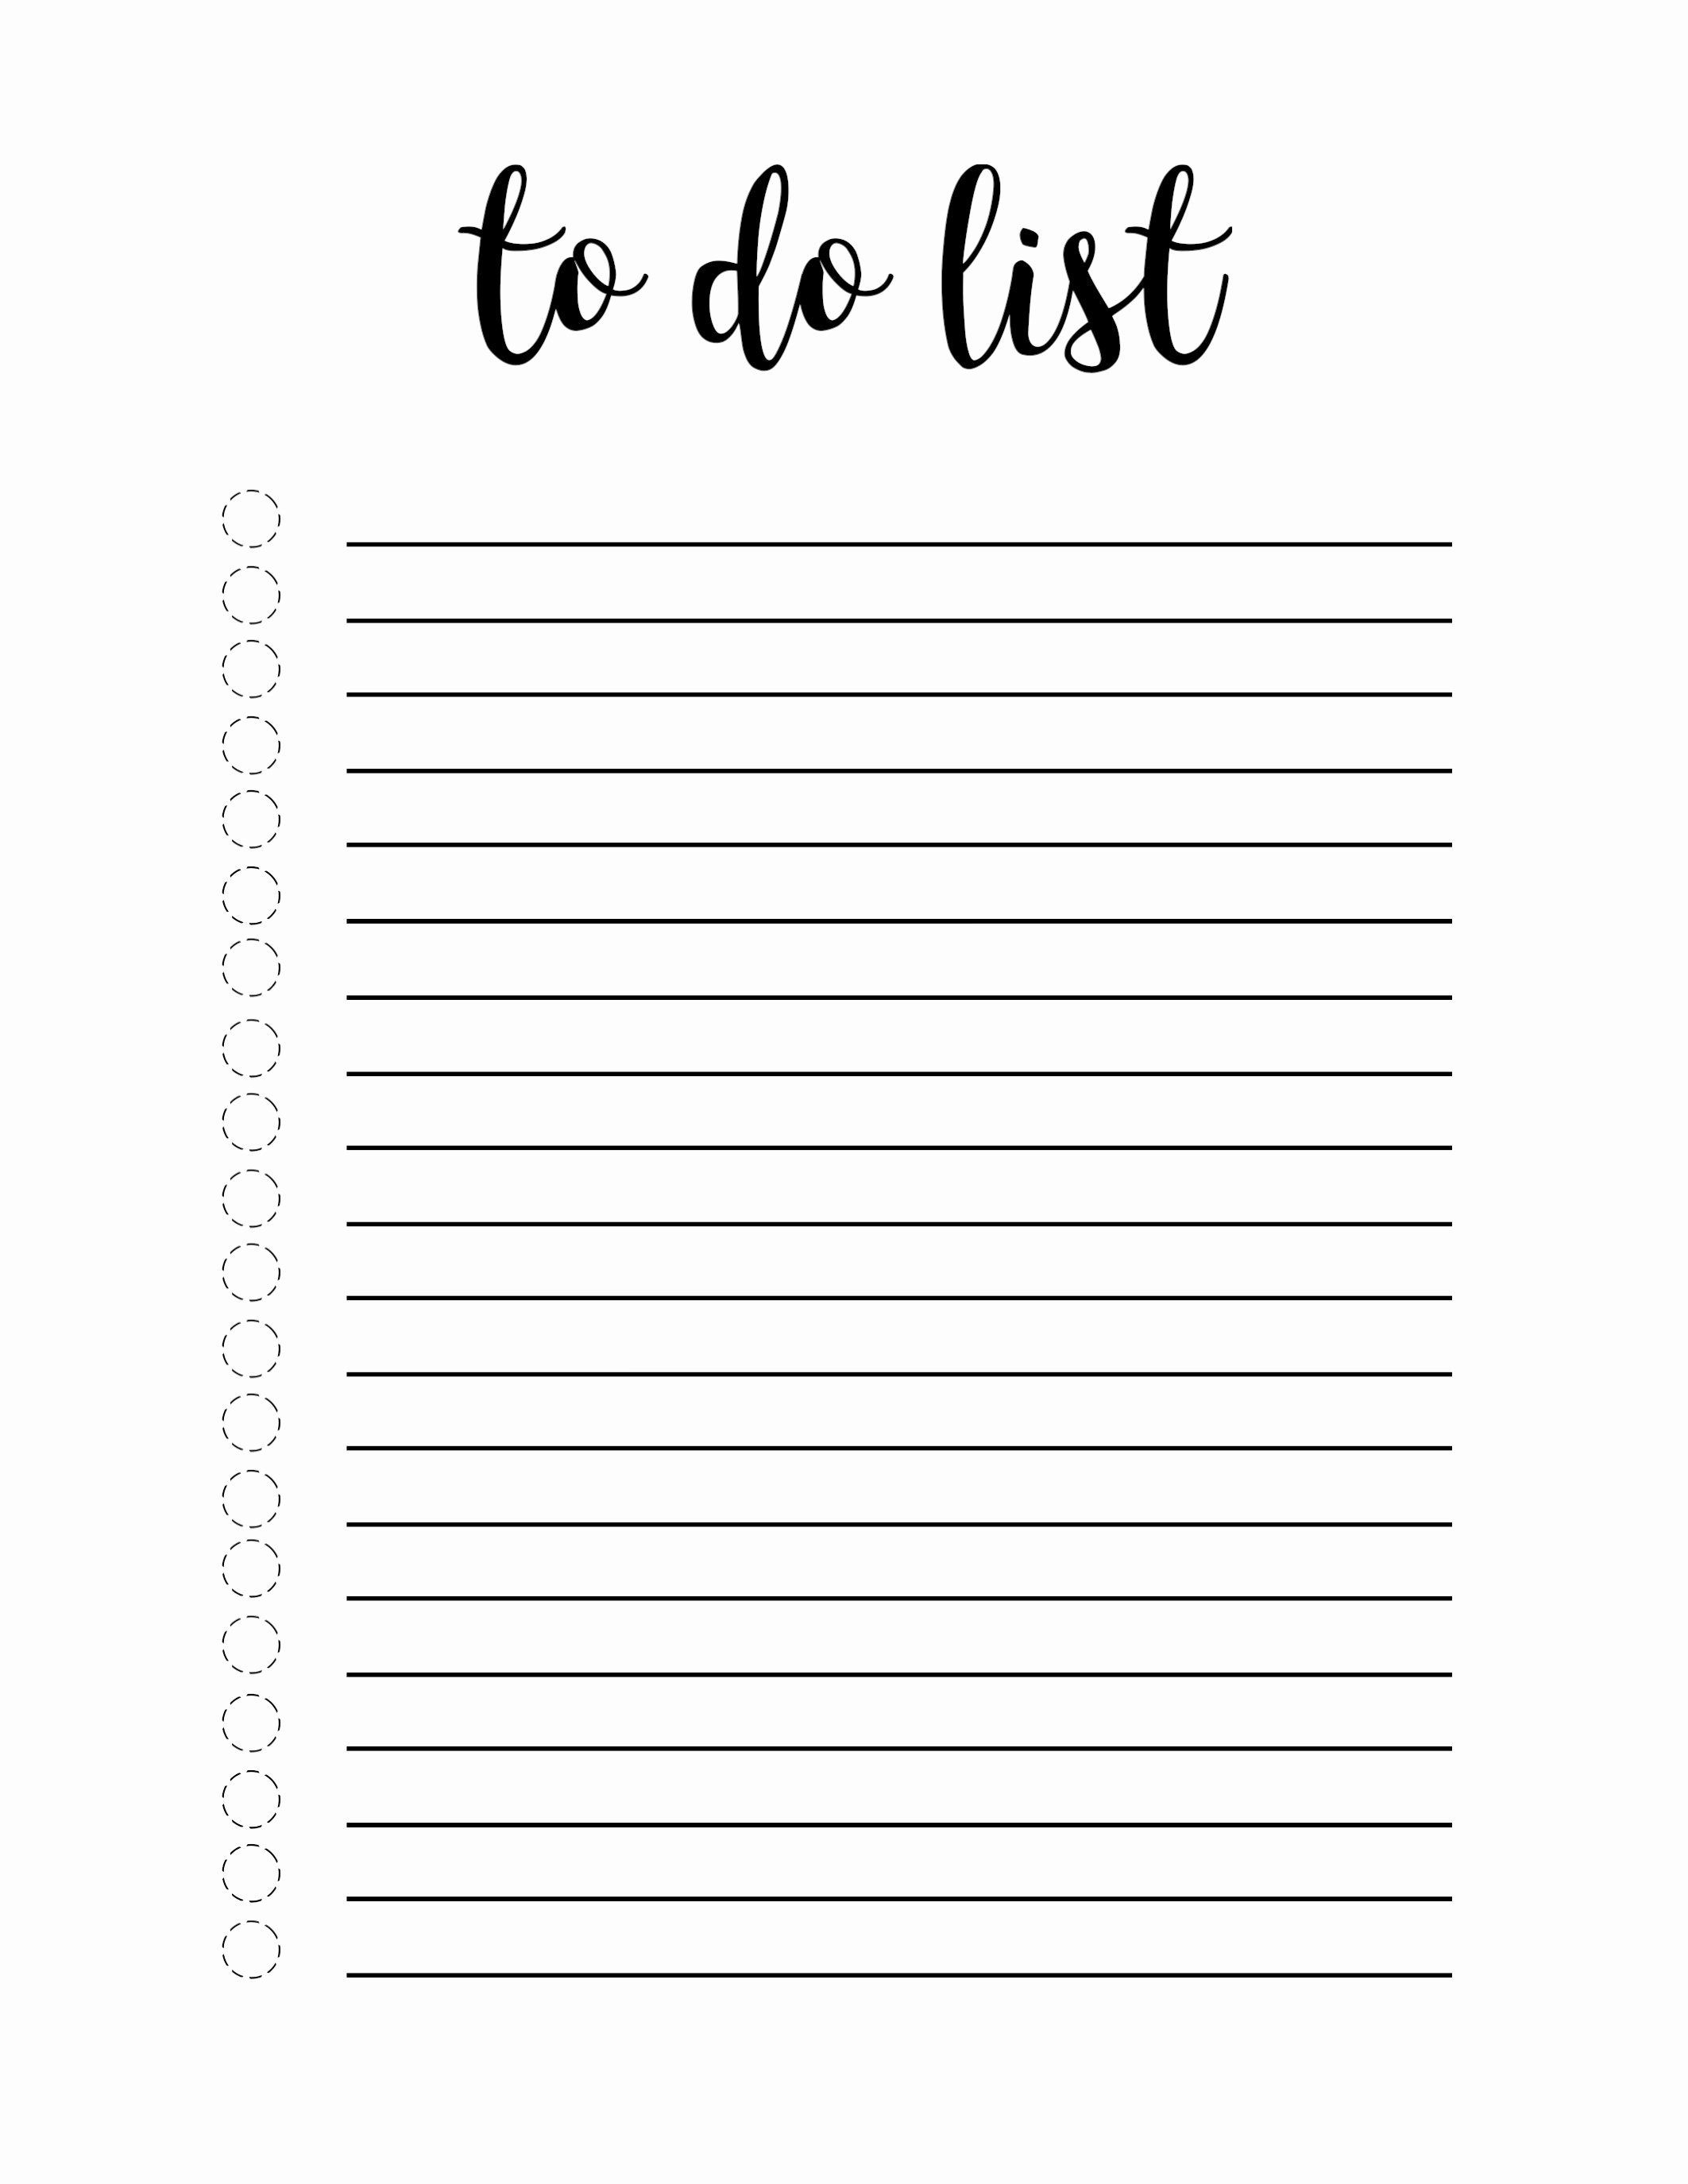 Things to Do List Template Inspirational Free Printable to Do List Template Paper Trail Design